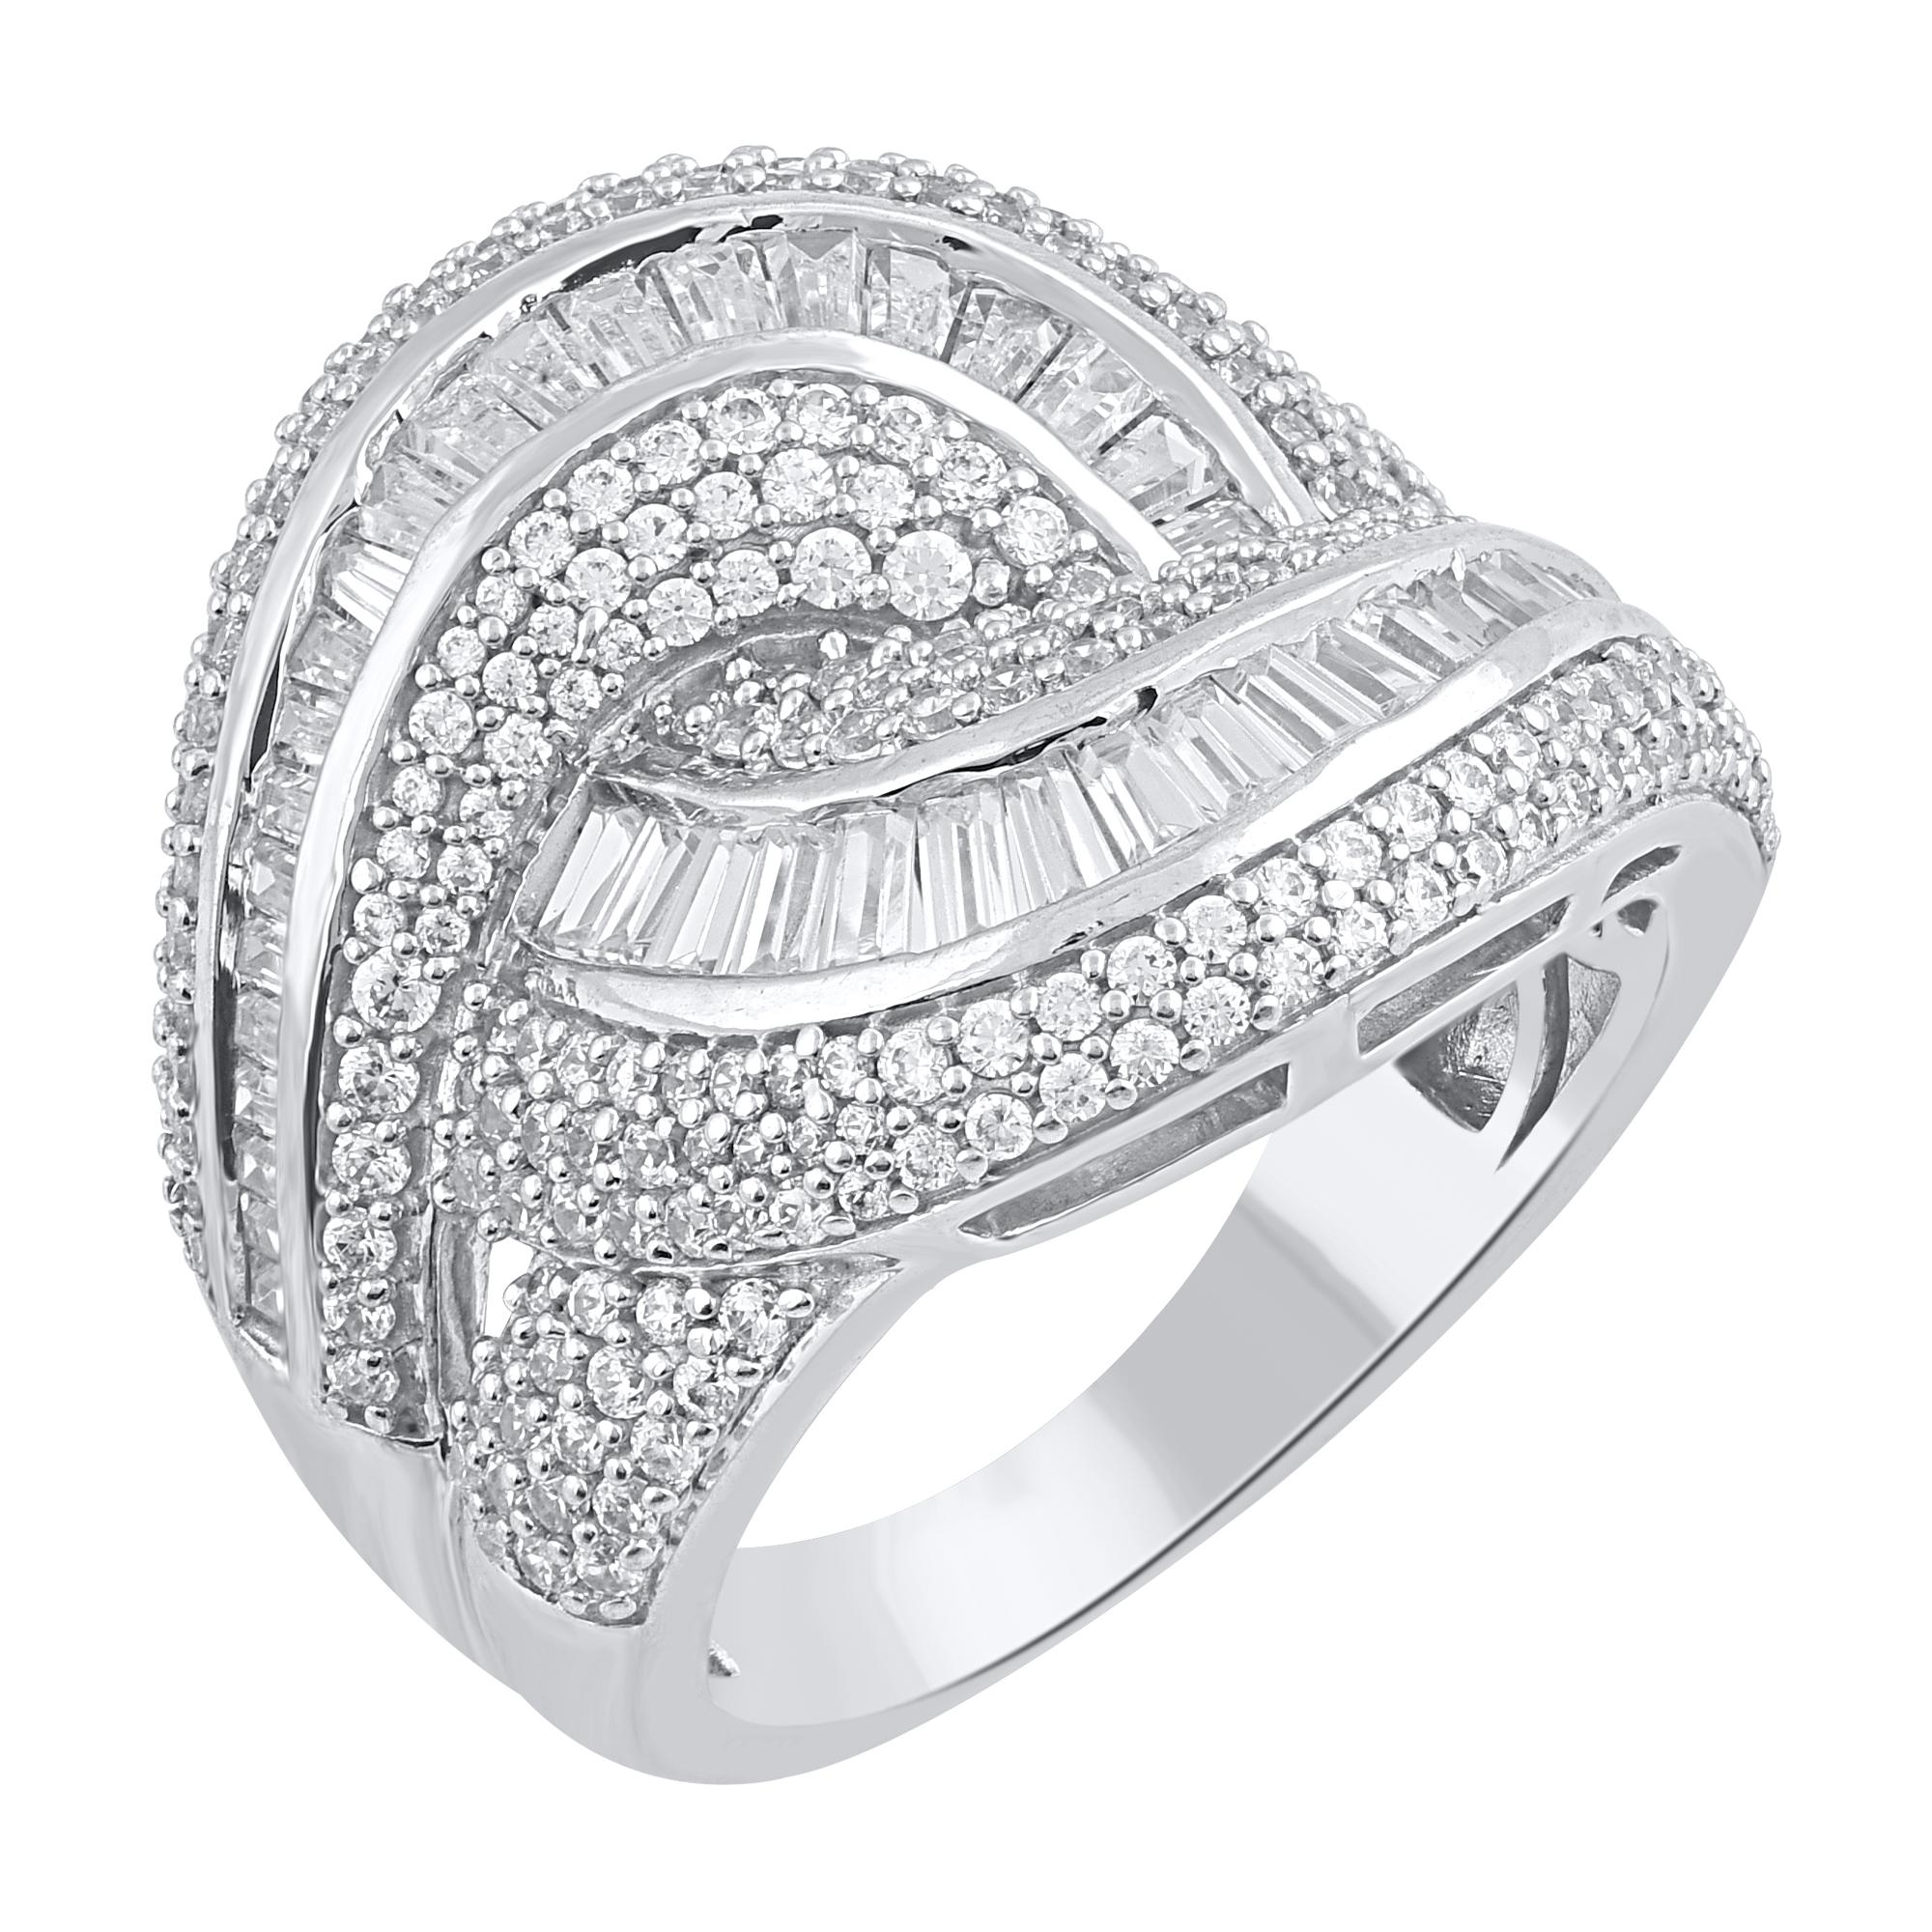 Bold and blissful style, this diamond band ring is beautifully crafted in 18 Karat white gold studded with sparkling 300 brilliant cut, single cut diamonds and baguette diamond in channel & pave setting. Total diamond weight is 2.0 carat. The